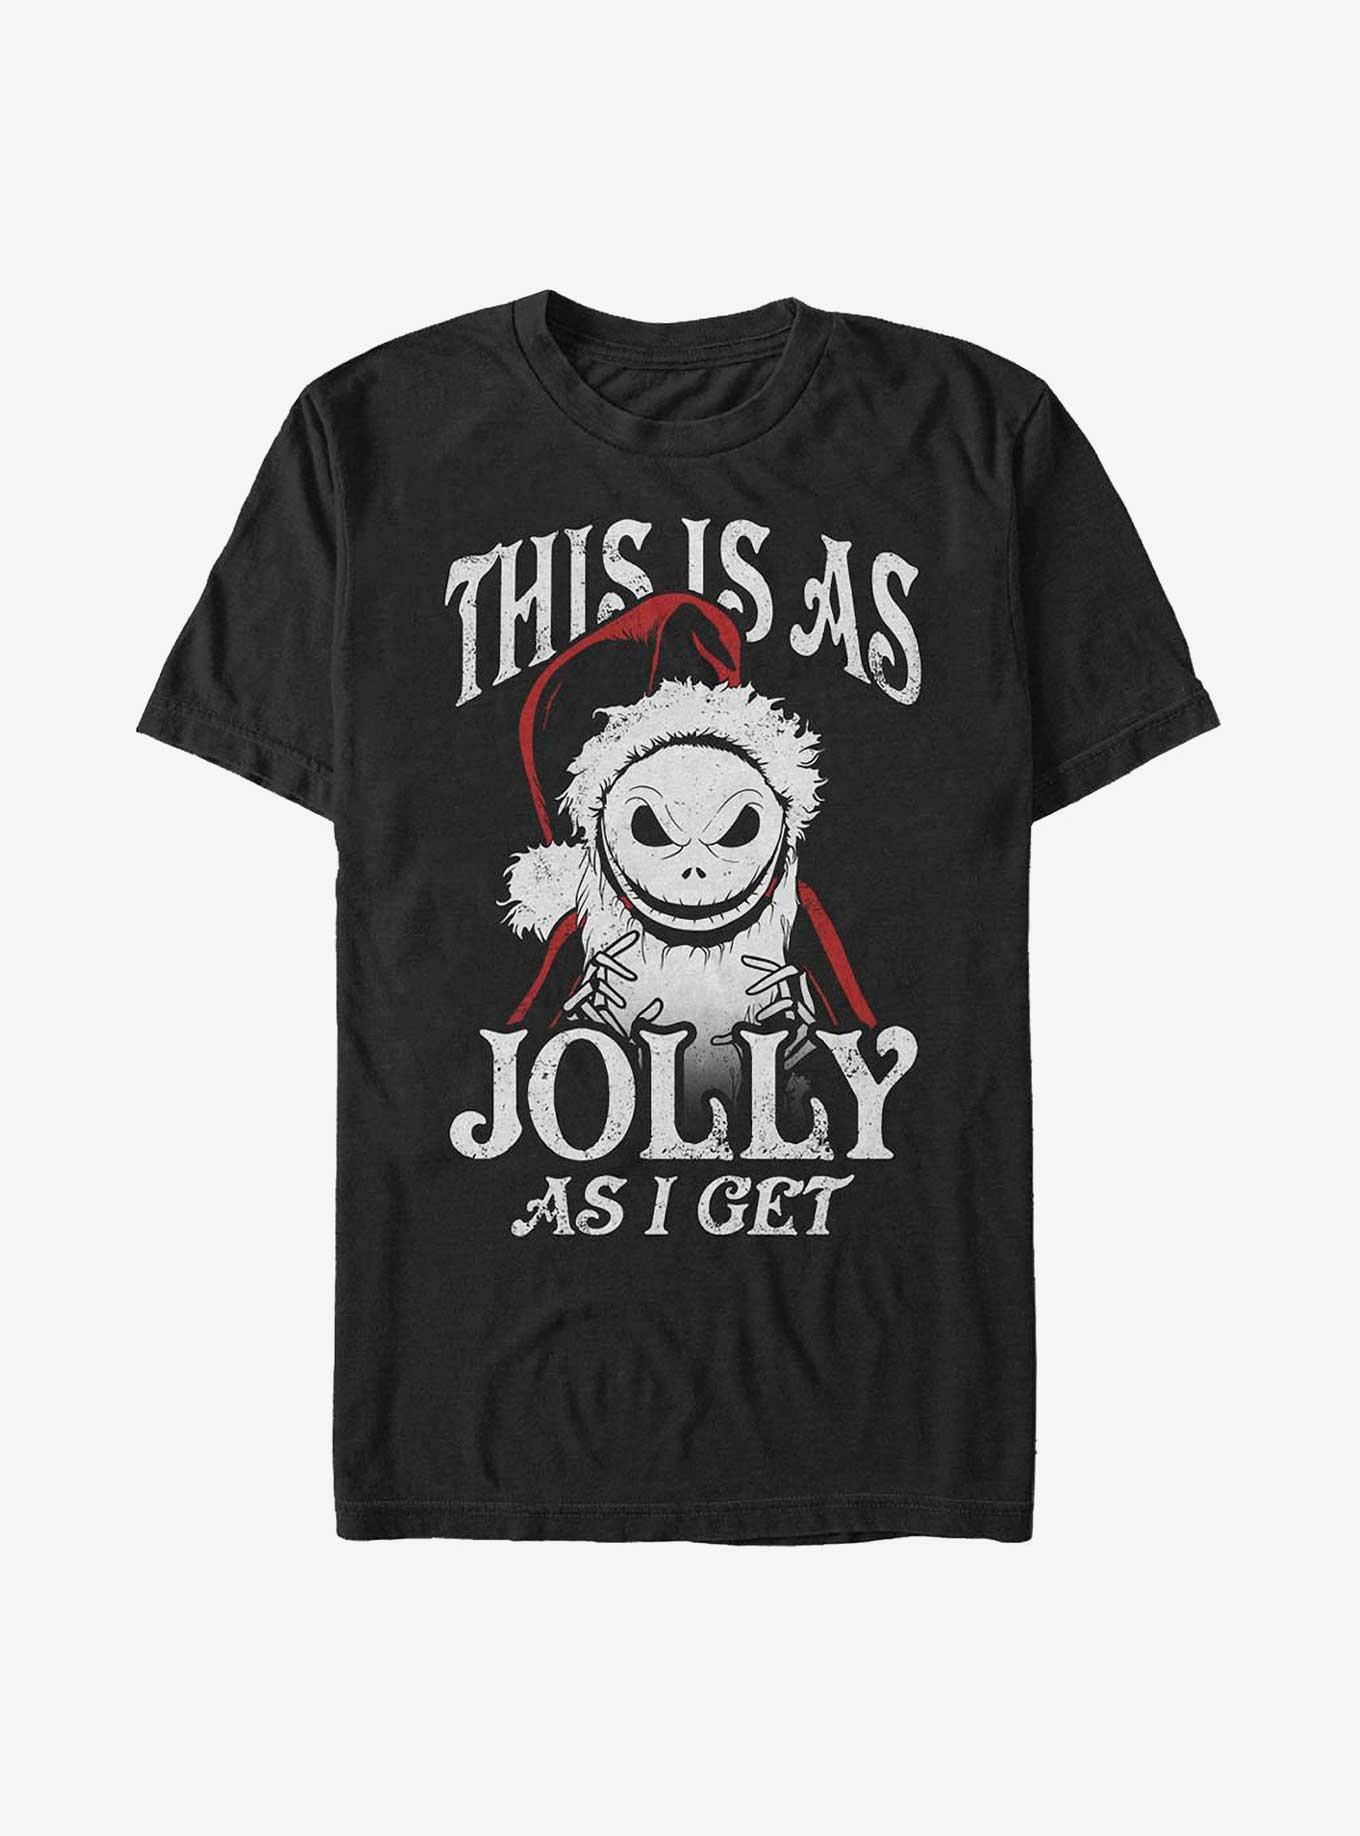 Disney The Nightmare Before Christmas This Is As Jolly As I Get Santa Jack T-Shirt, BLACK, hi-res